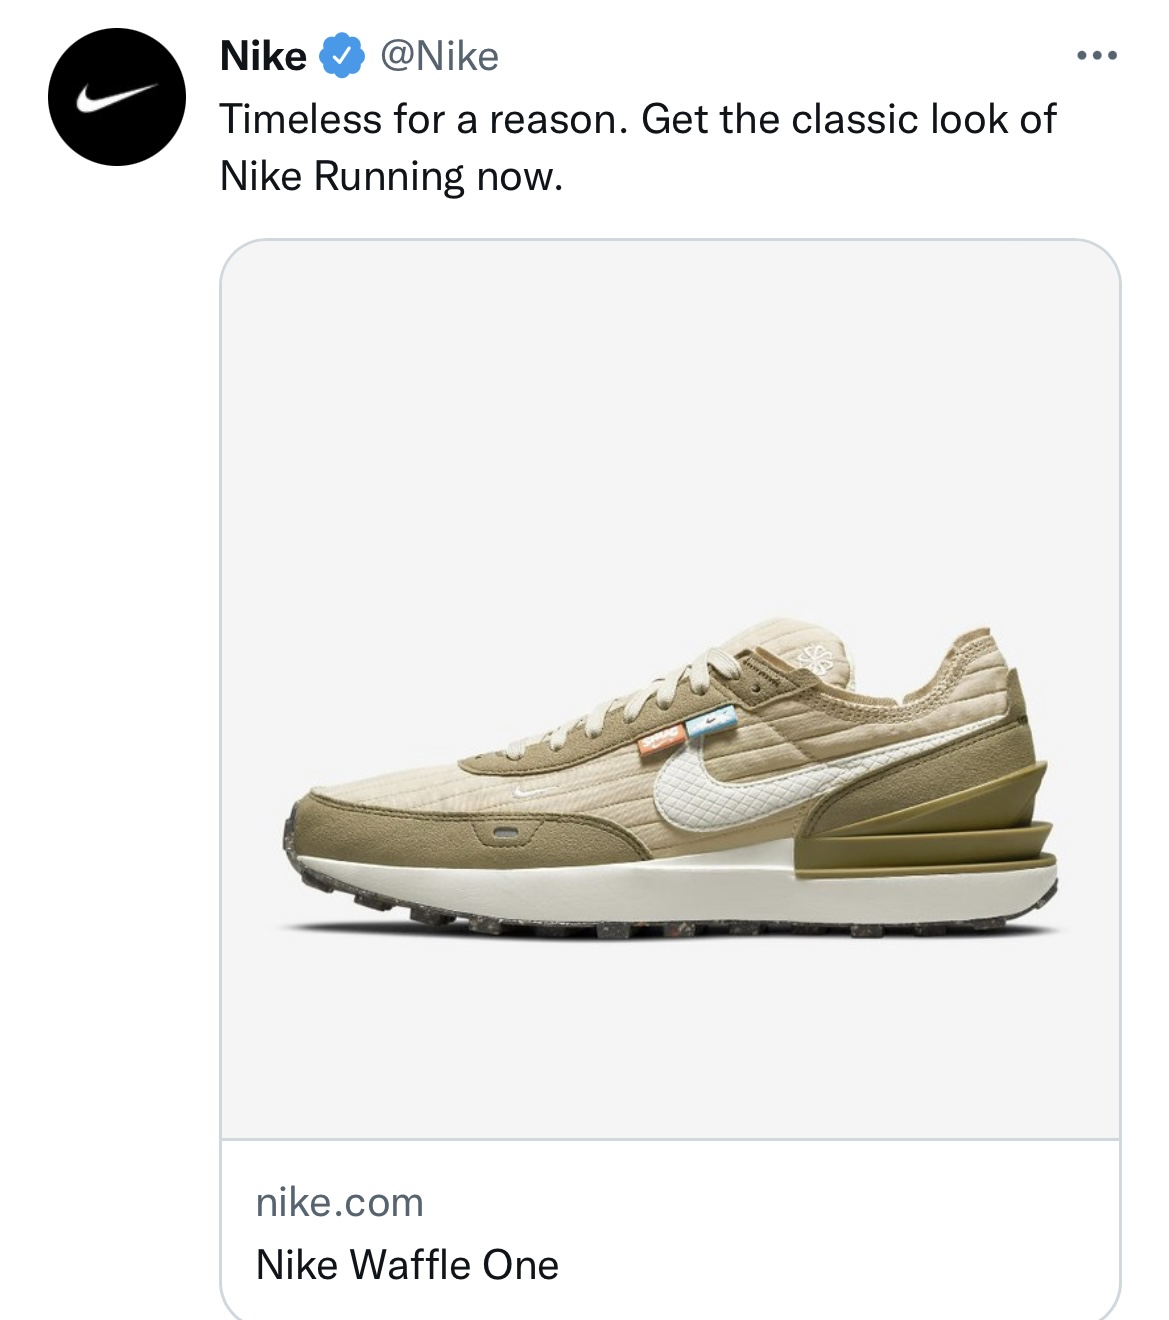 Fácil de comprender patio de recreo Resbaladizo Cas Mudde 😷 on Twitter: "This is the dumbest and most annoying Twitter ad  I have ever had — and the bar is high! @nike has been pushing this ad for  weeks